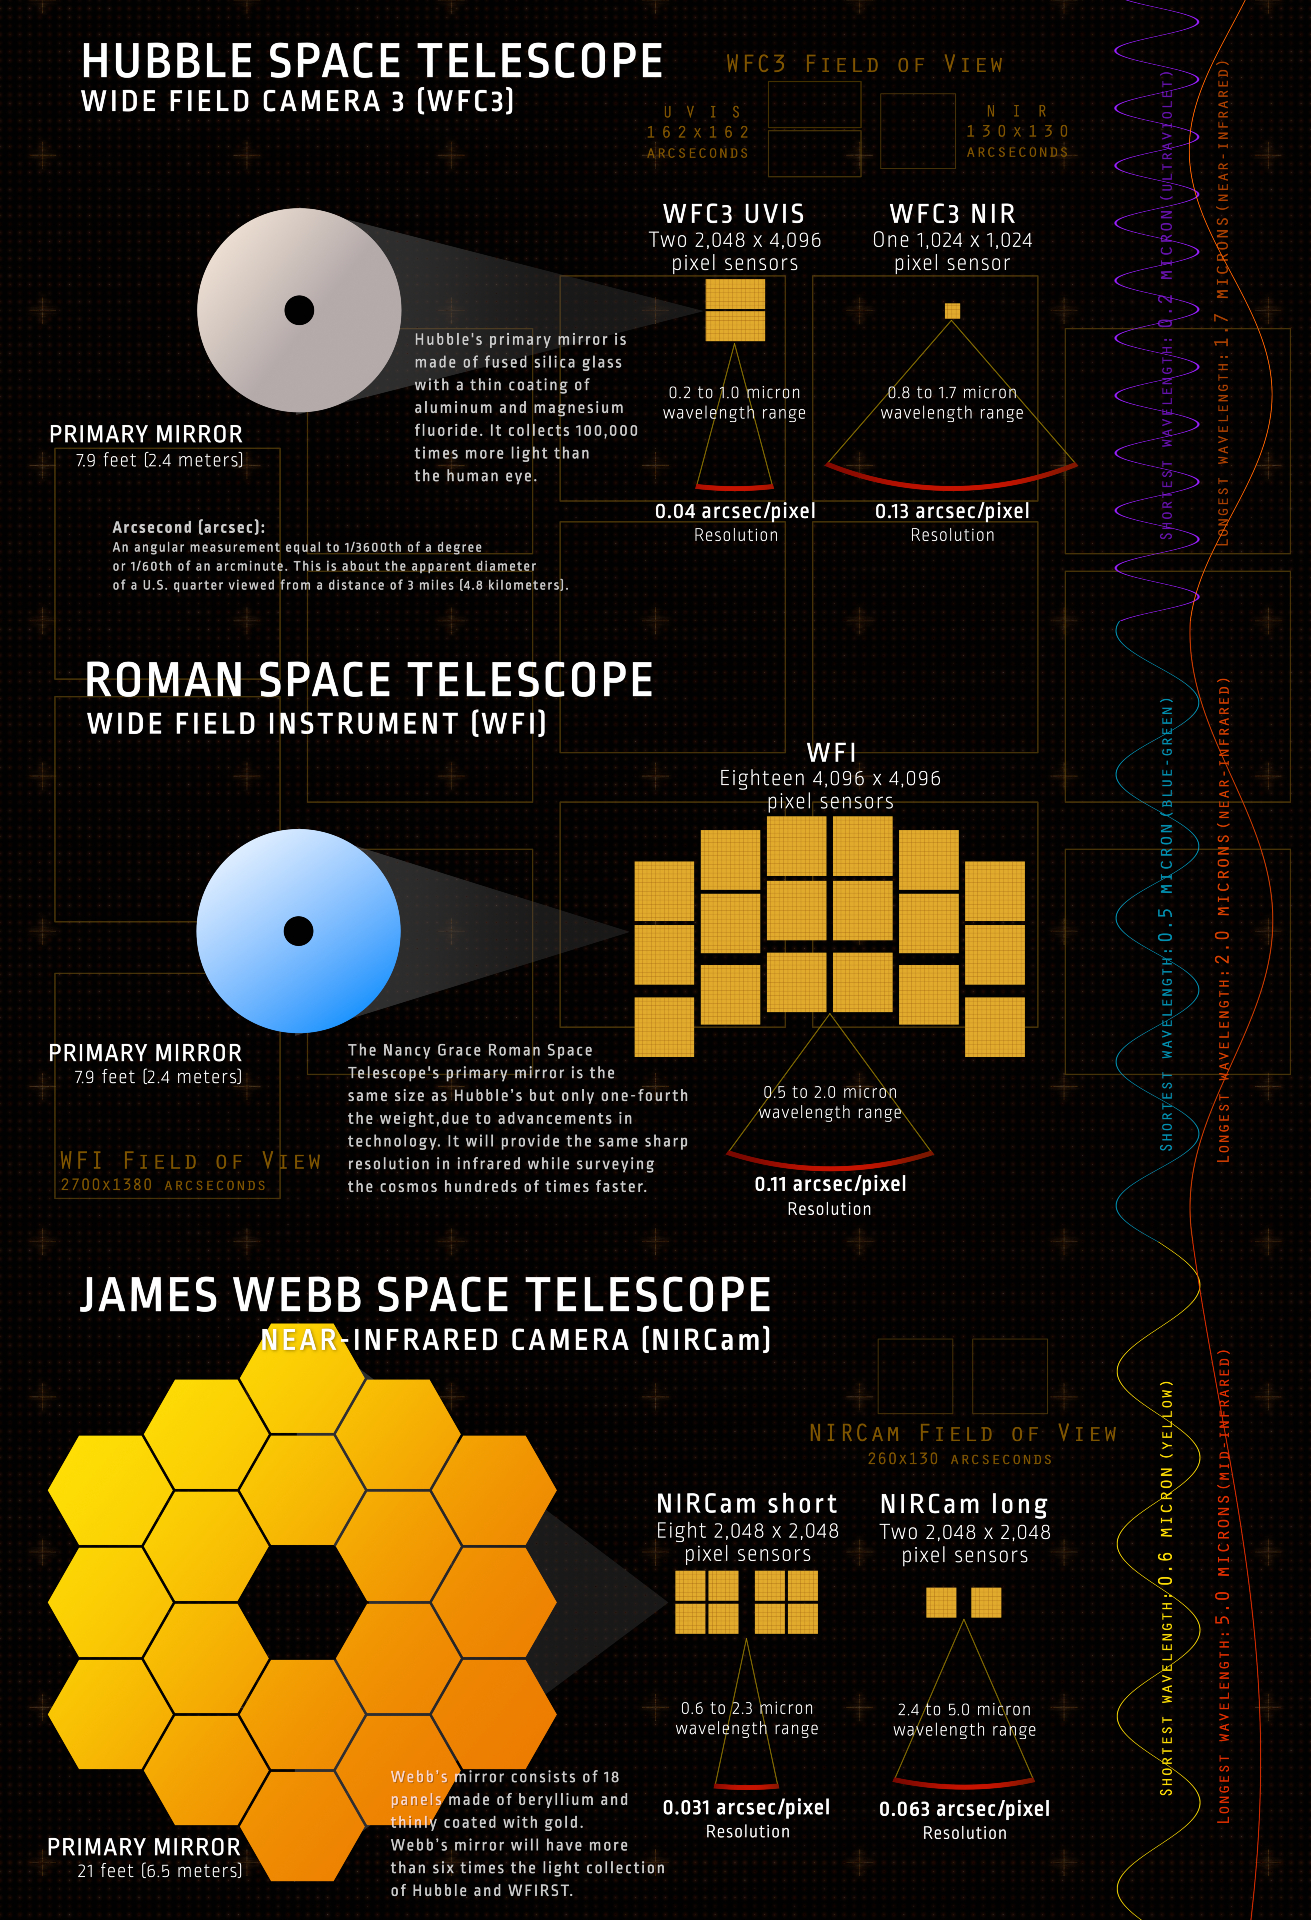 An infographic comparing the Nancy Grace Roman Space Telescope to the Hubble Space Telescope and the James Webb Space Telescope.